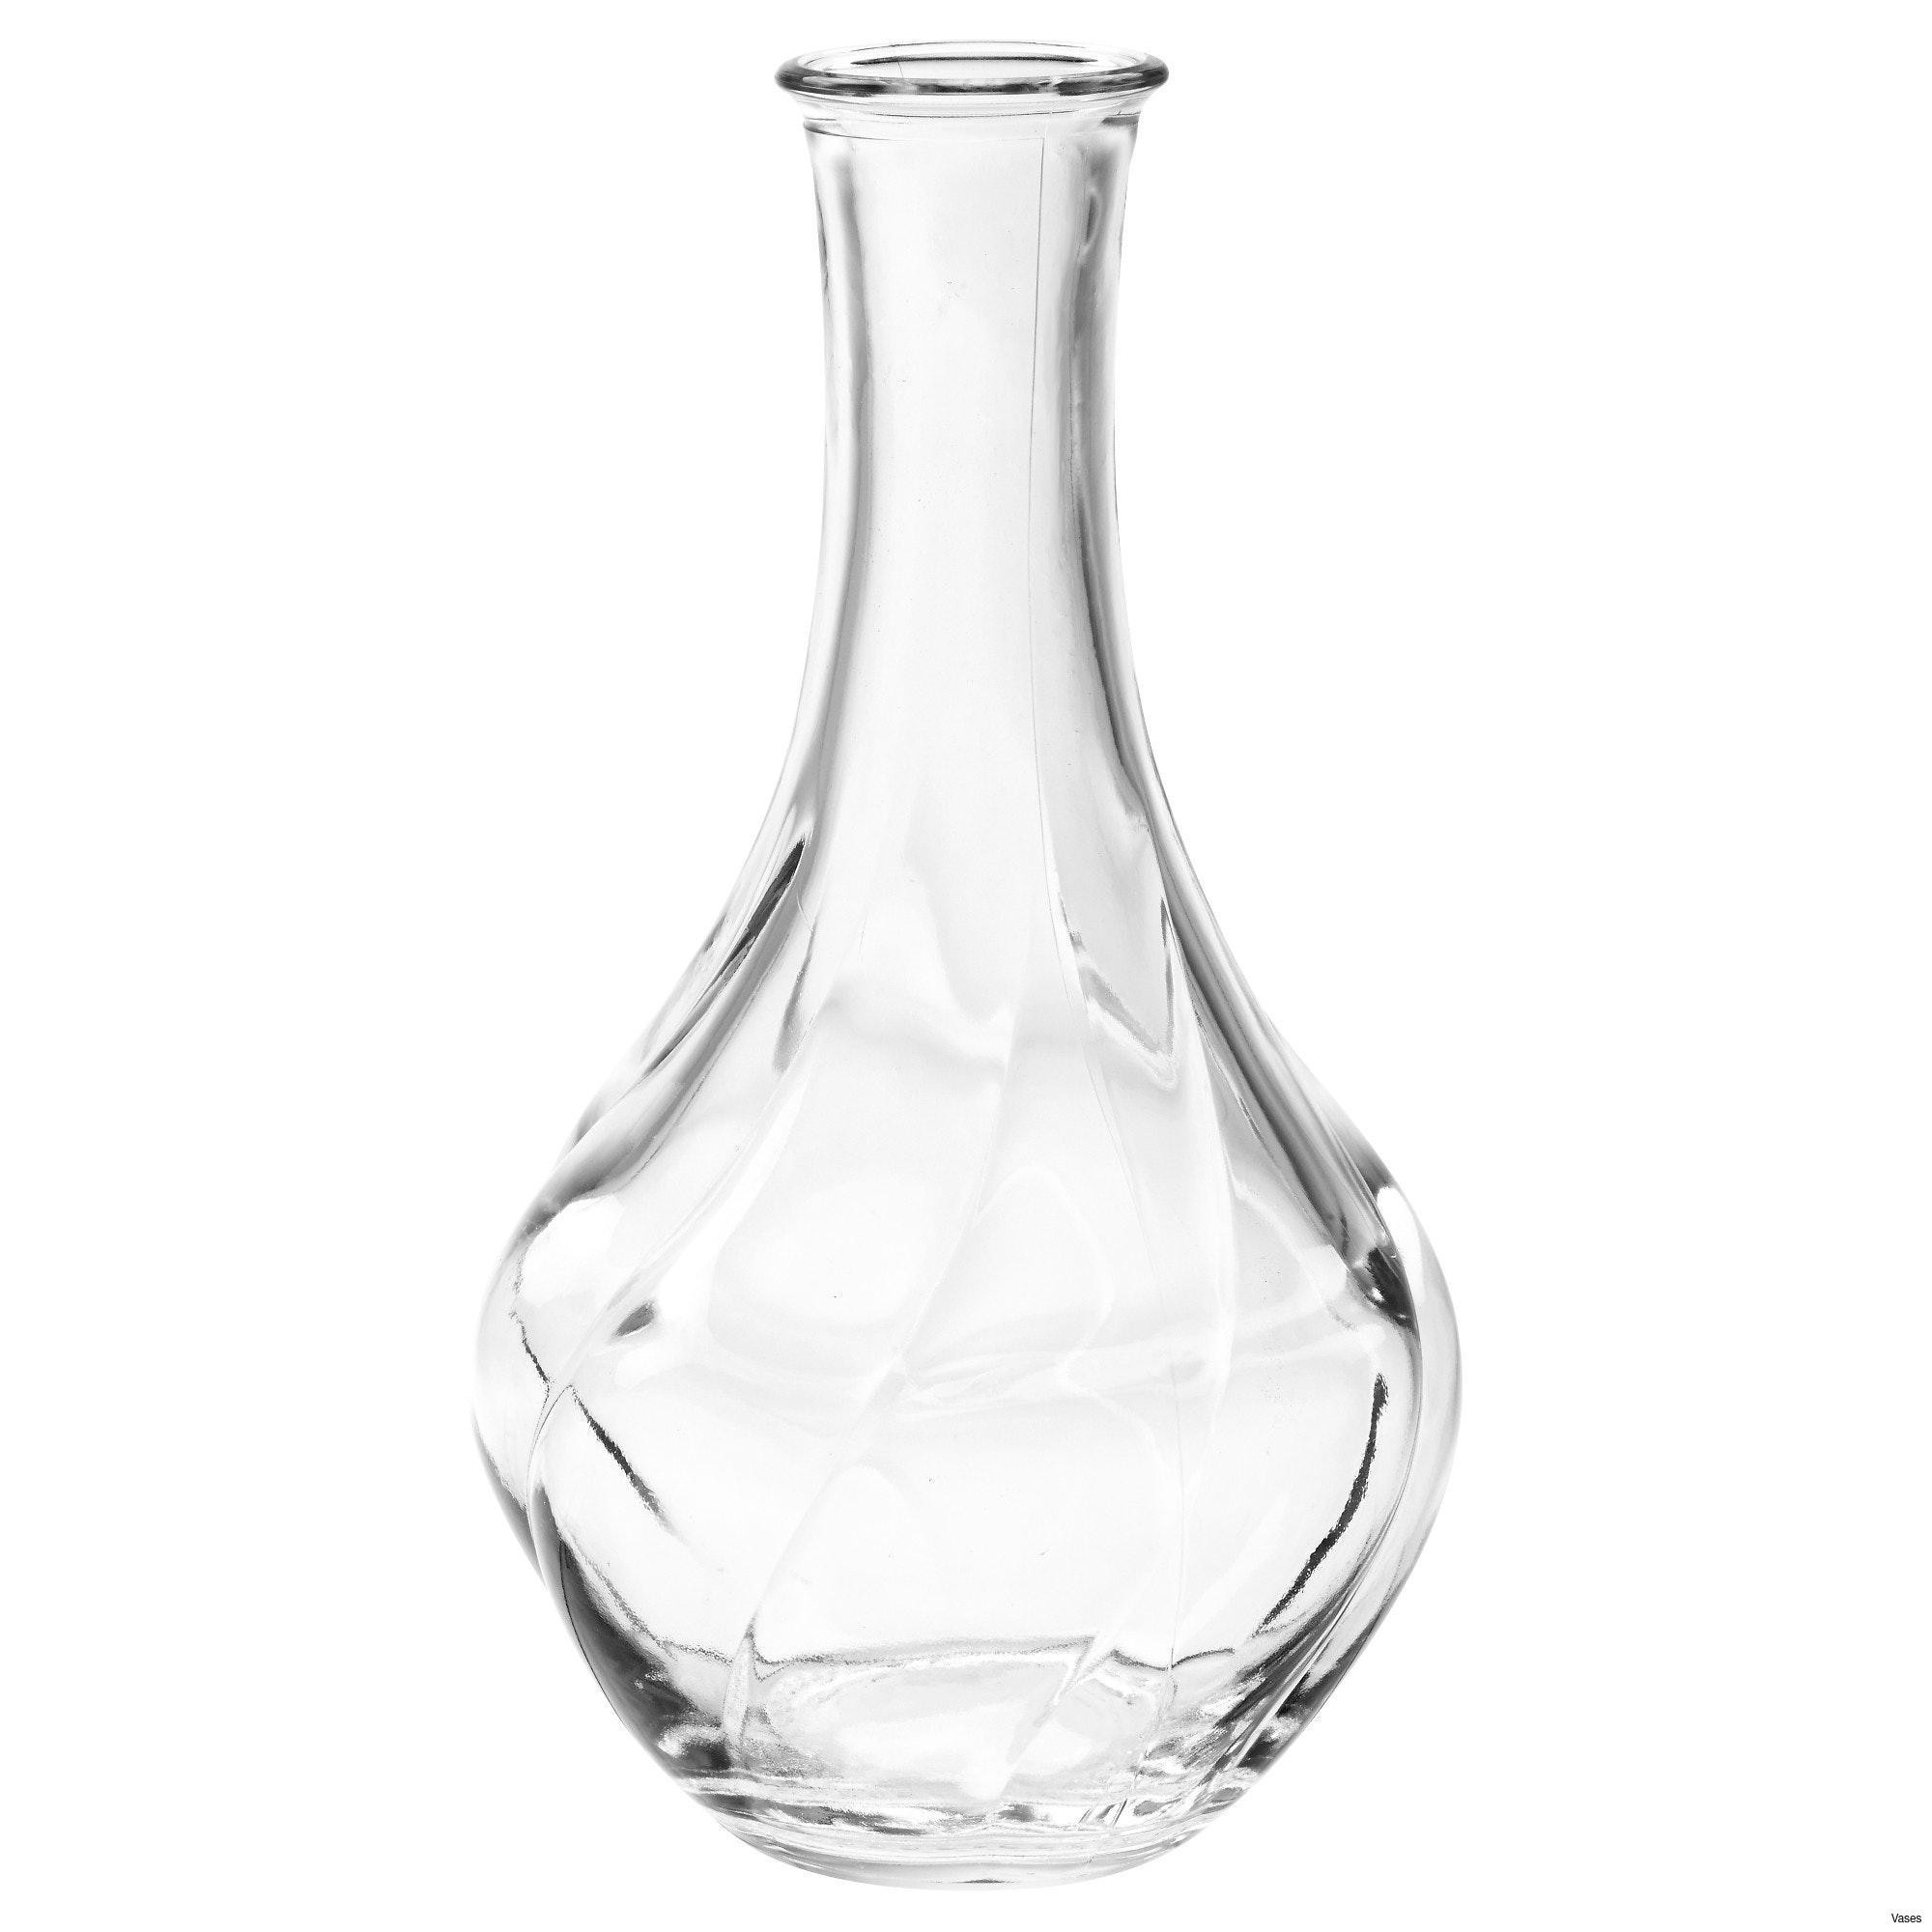 29 Cute Waterford Vase Patterns 2024 free download waterford vase patterns of large crystal vase pictures living room glass vases fresh clear vase throughout large crystal vase pictures living room glass vases fresh clear vase 0d tags amazin